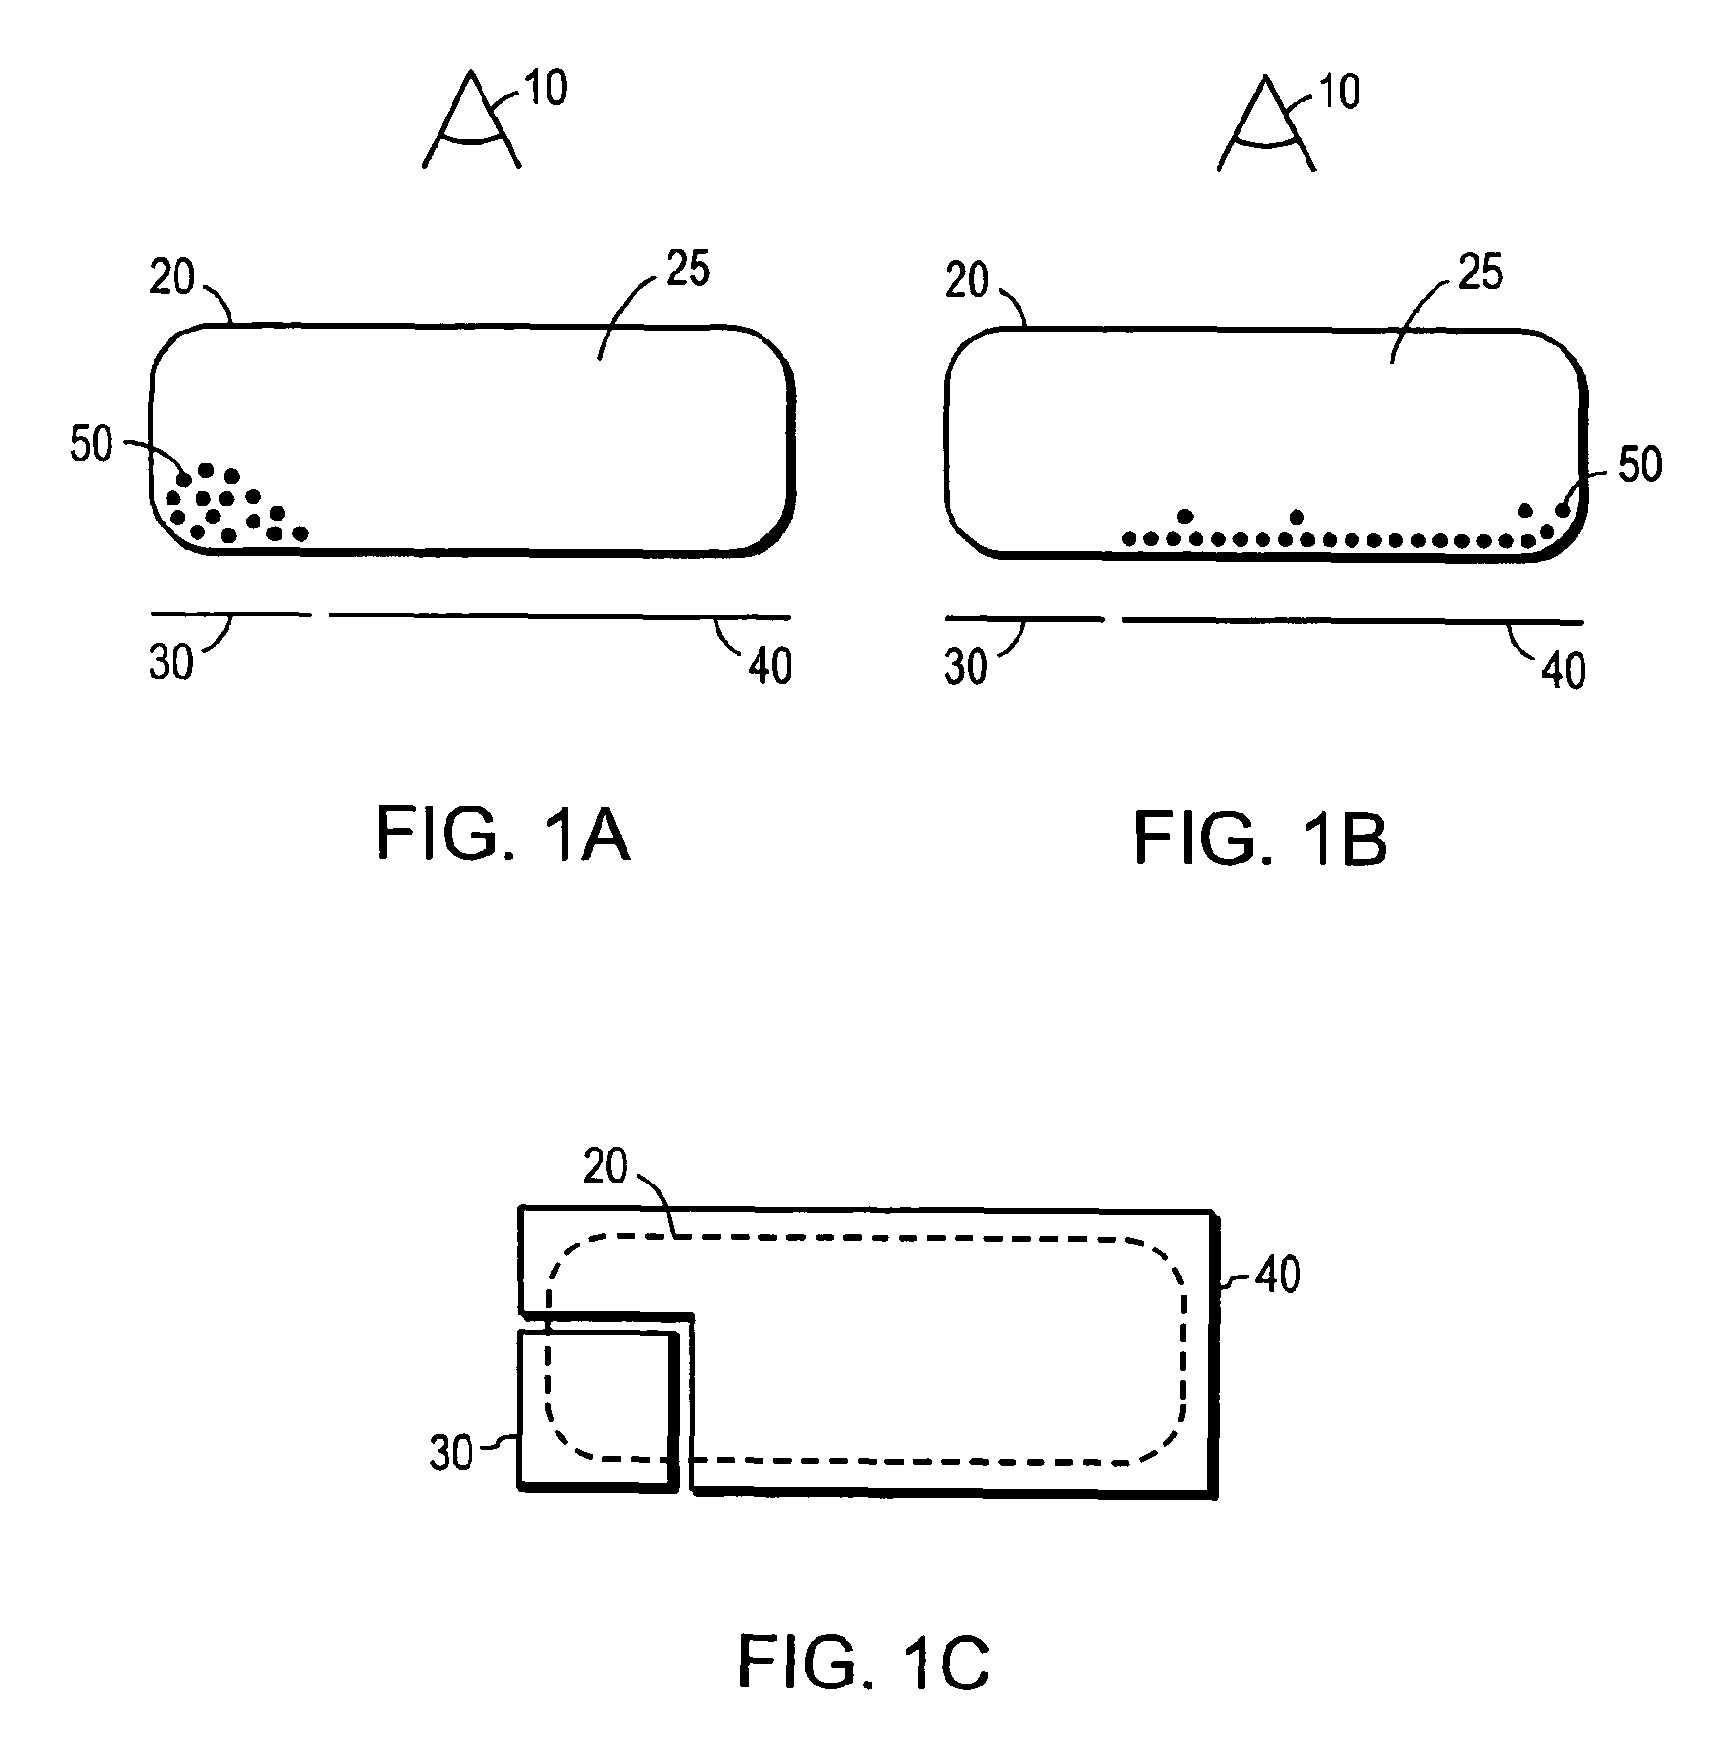 Electrophoretic displays with controlled amounts of pigment